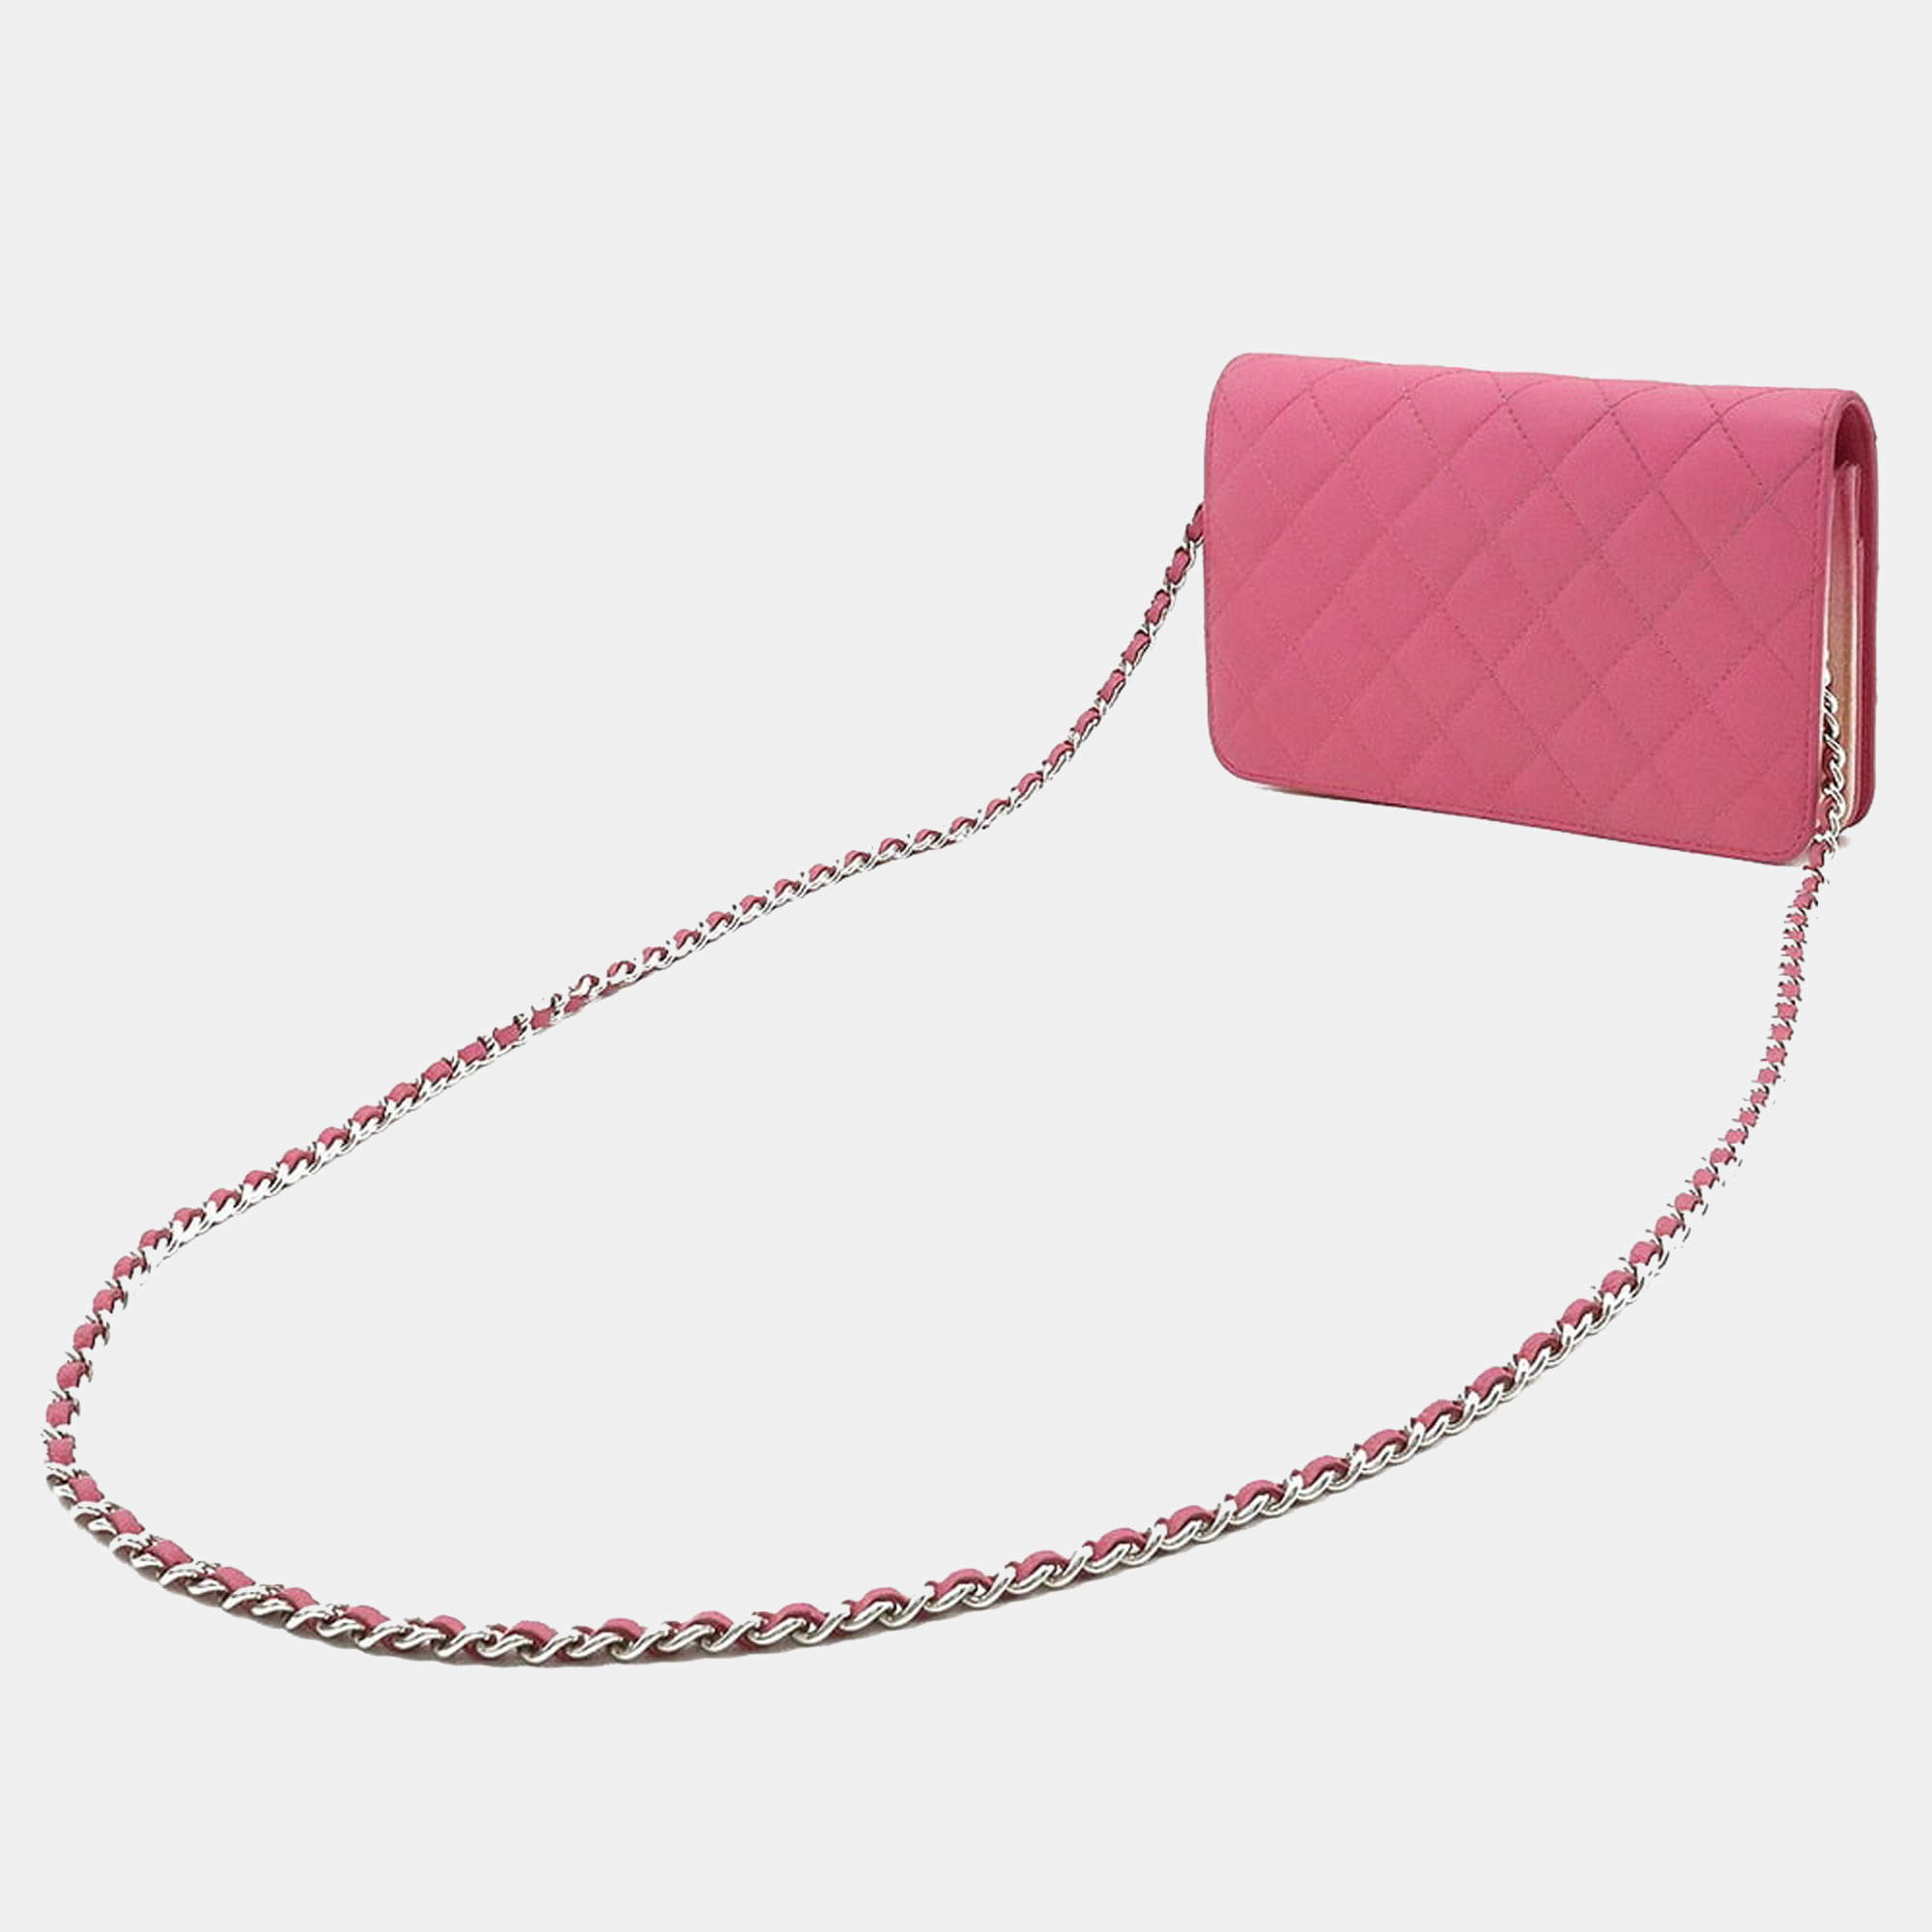 Chanel Pink Classic Quilted Wallet on Chain Caviar Calfskin